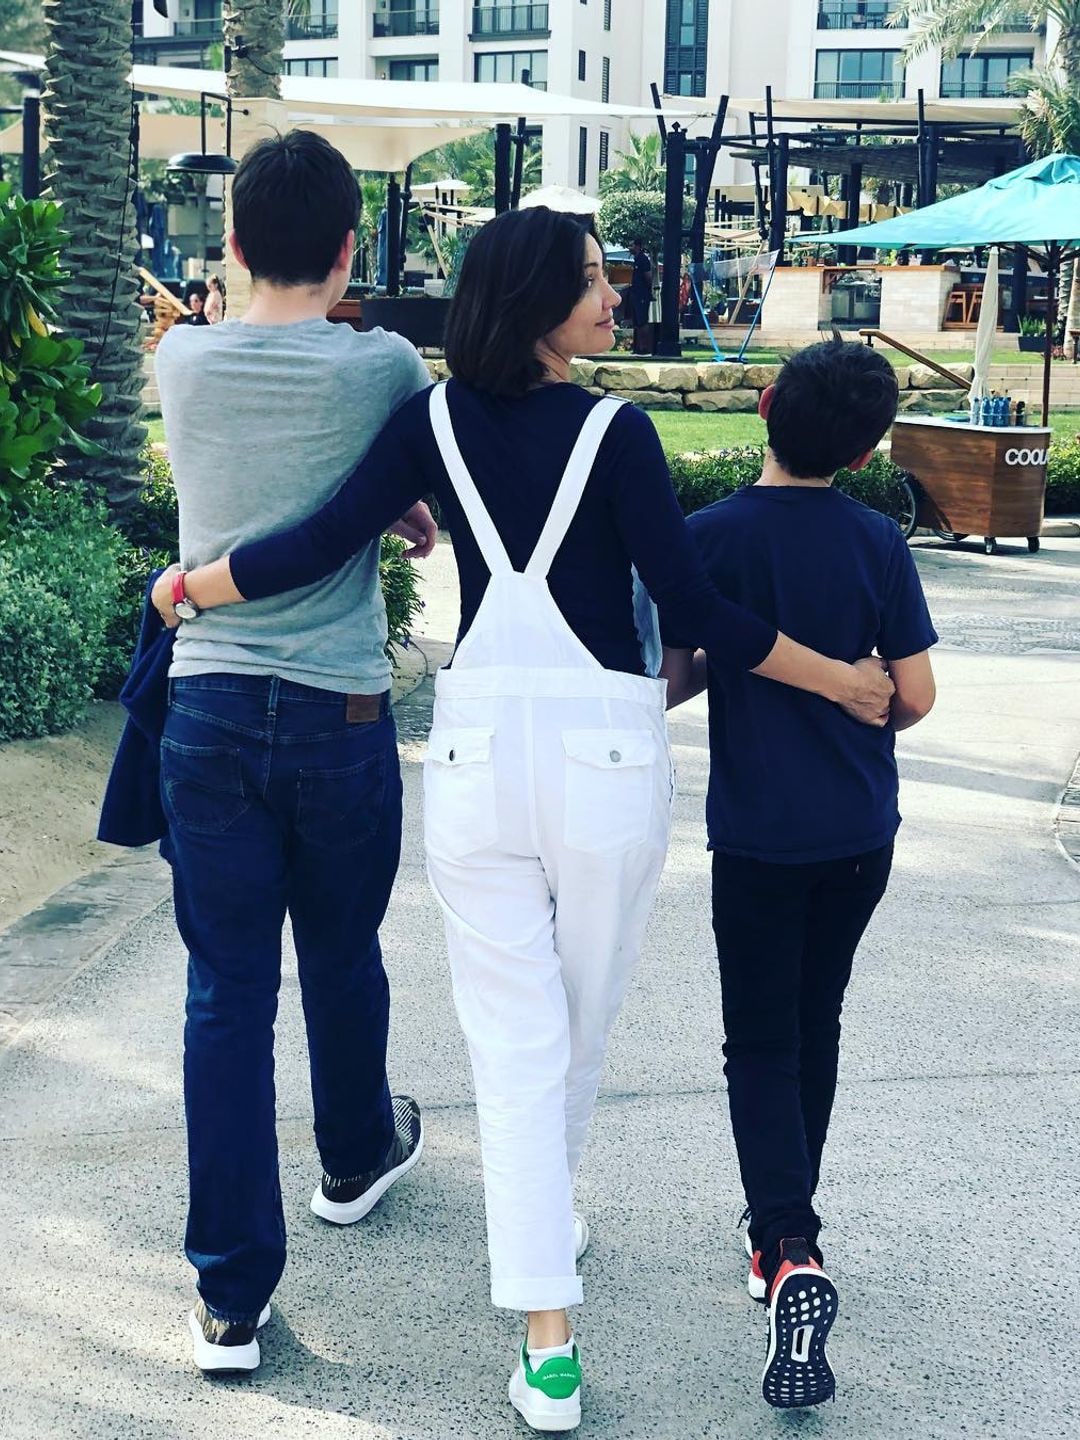 Ben previously revealed he absolutely loves this photo of wife Annie with their boys